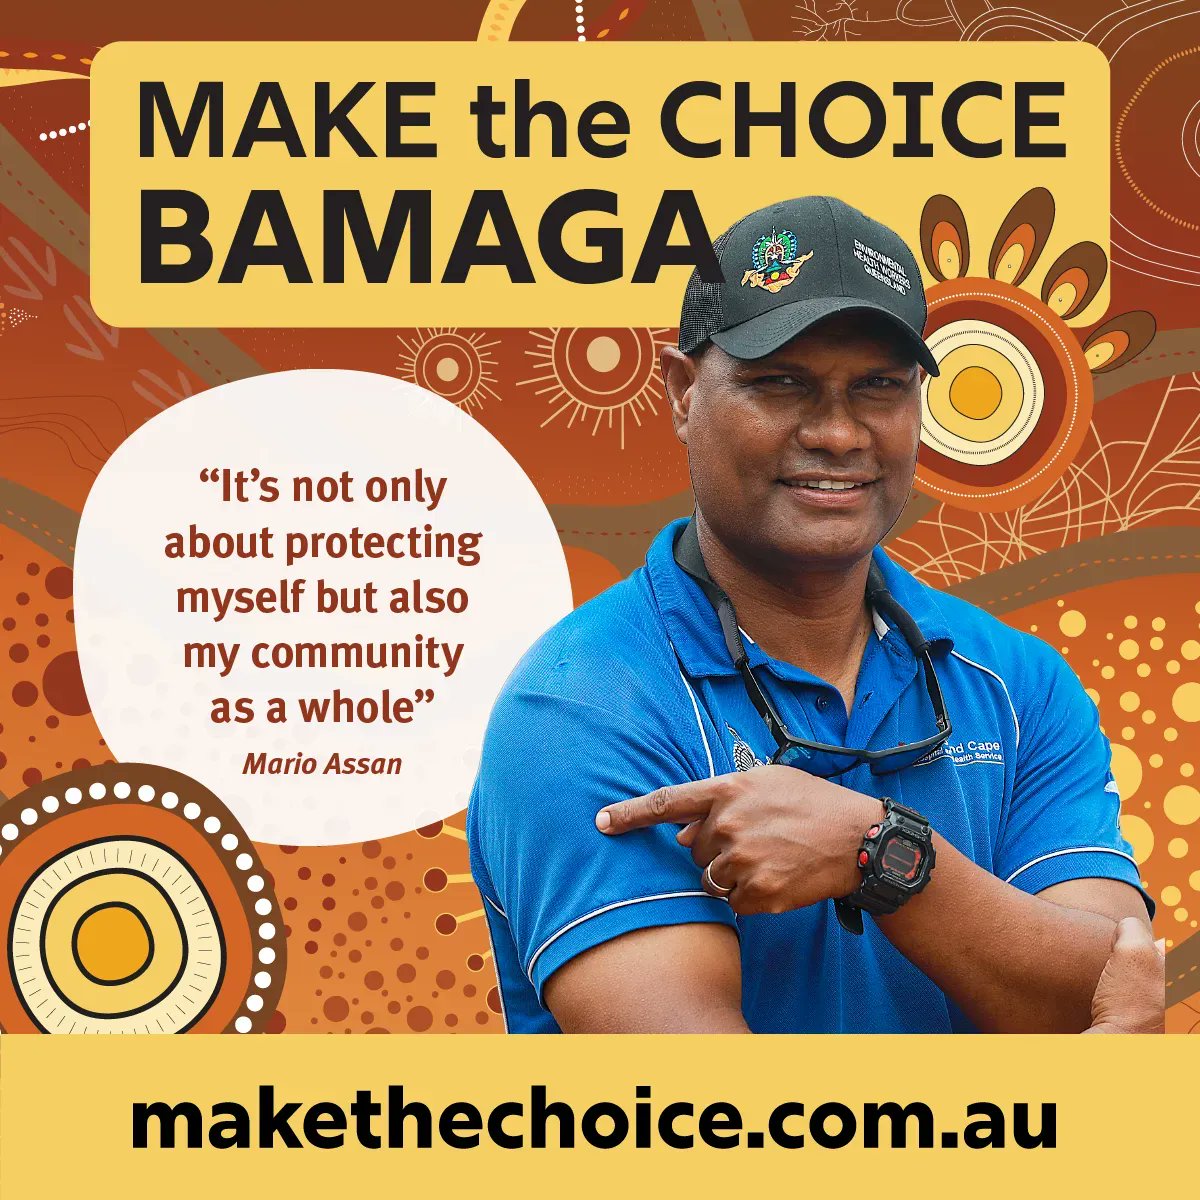 What prompted Mario Assan to make the choice to get the COVID-19 jab even though he hates needles?

To read more of Mario's story visit: makethechoice.com.au/stories. 

#MaketheChoice #KeepMobSafe #Coronavirus #COVID19 #health #QAIHC #Aboriginal #TorresStraitIslander